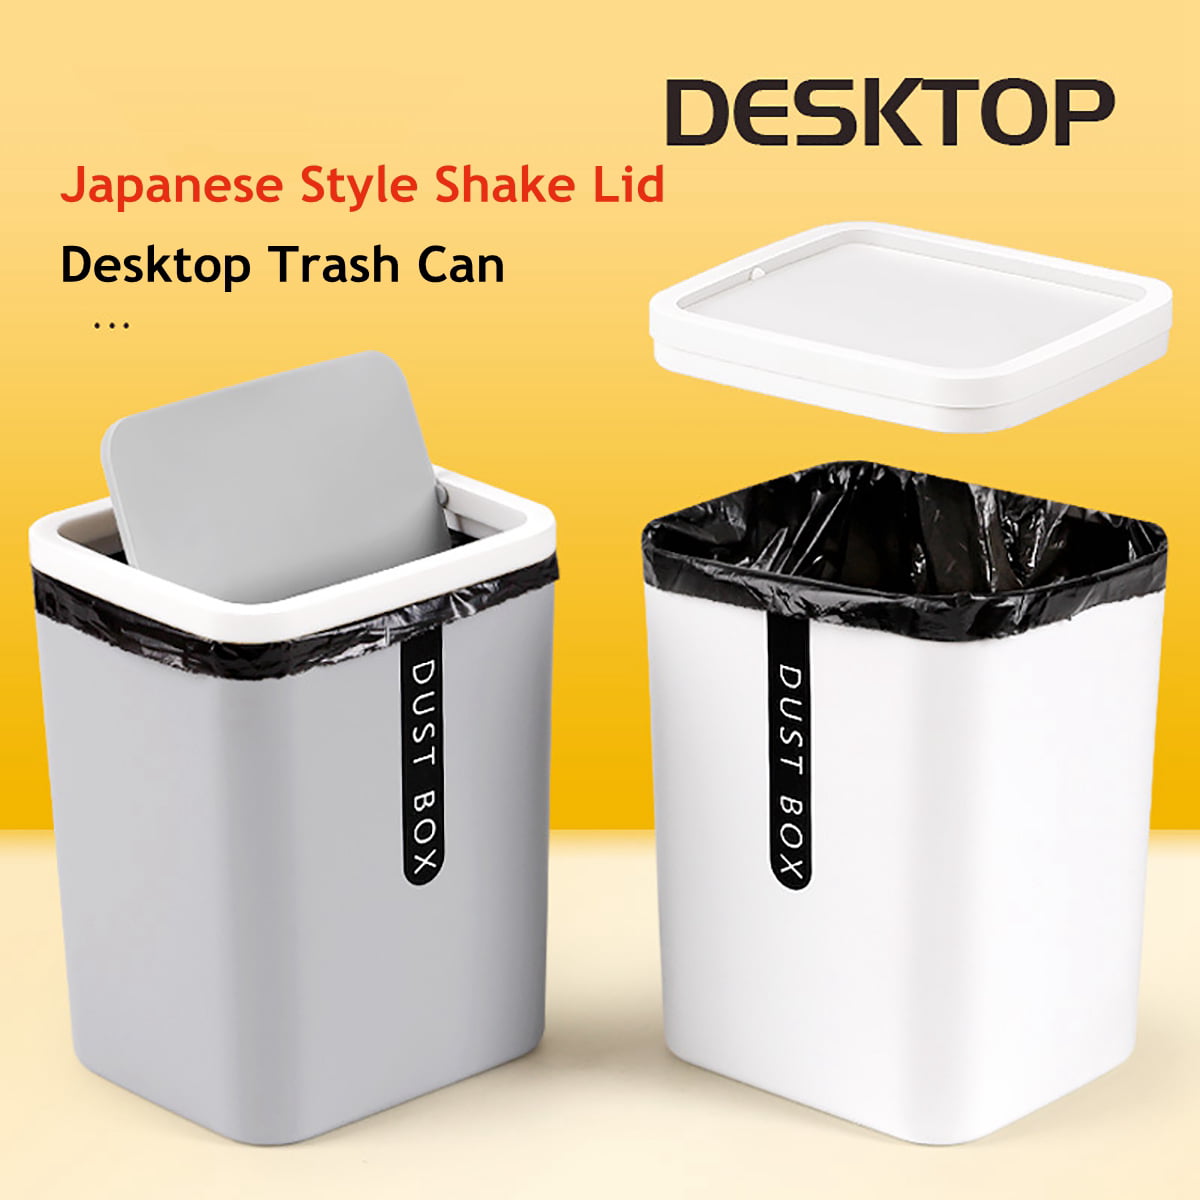 LALASTAR Mini Desktop Trash Can with Lid White 3L/0.8 Gal Small Countertop Garbage Can Plastic Tiny Tabletop Wastebasket for Office/Kitchen/Coffee Table